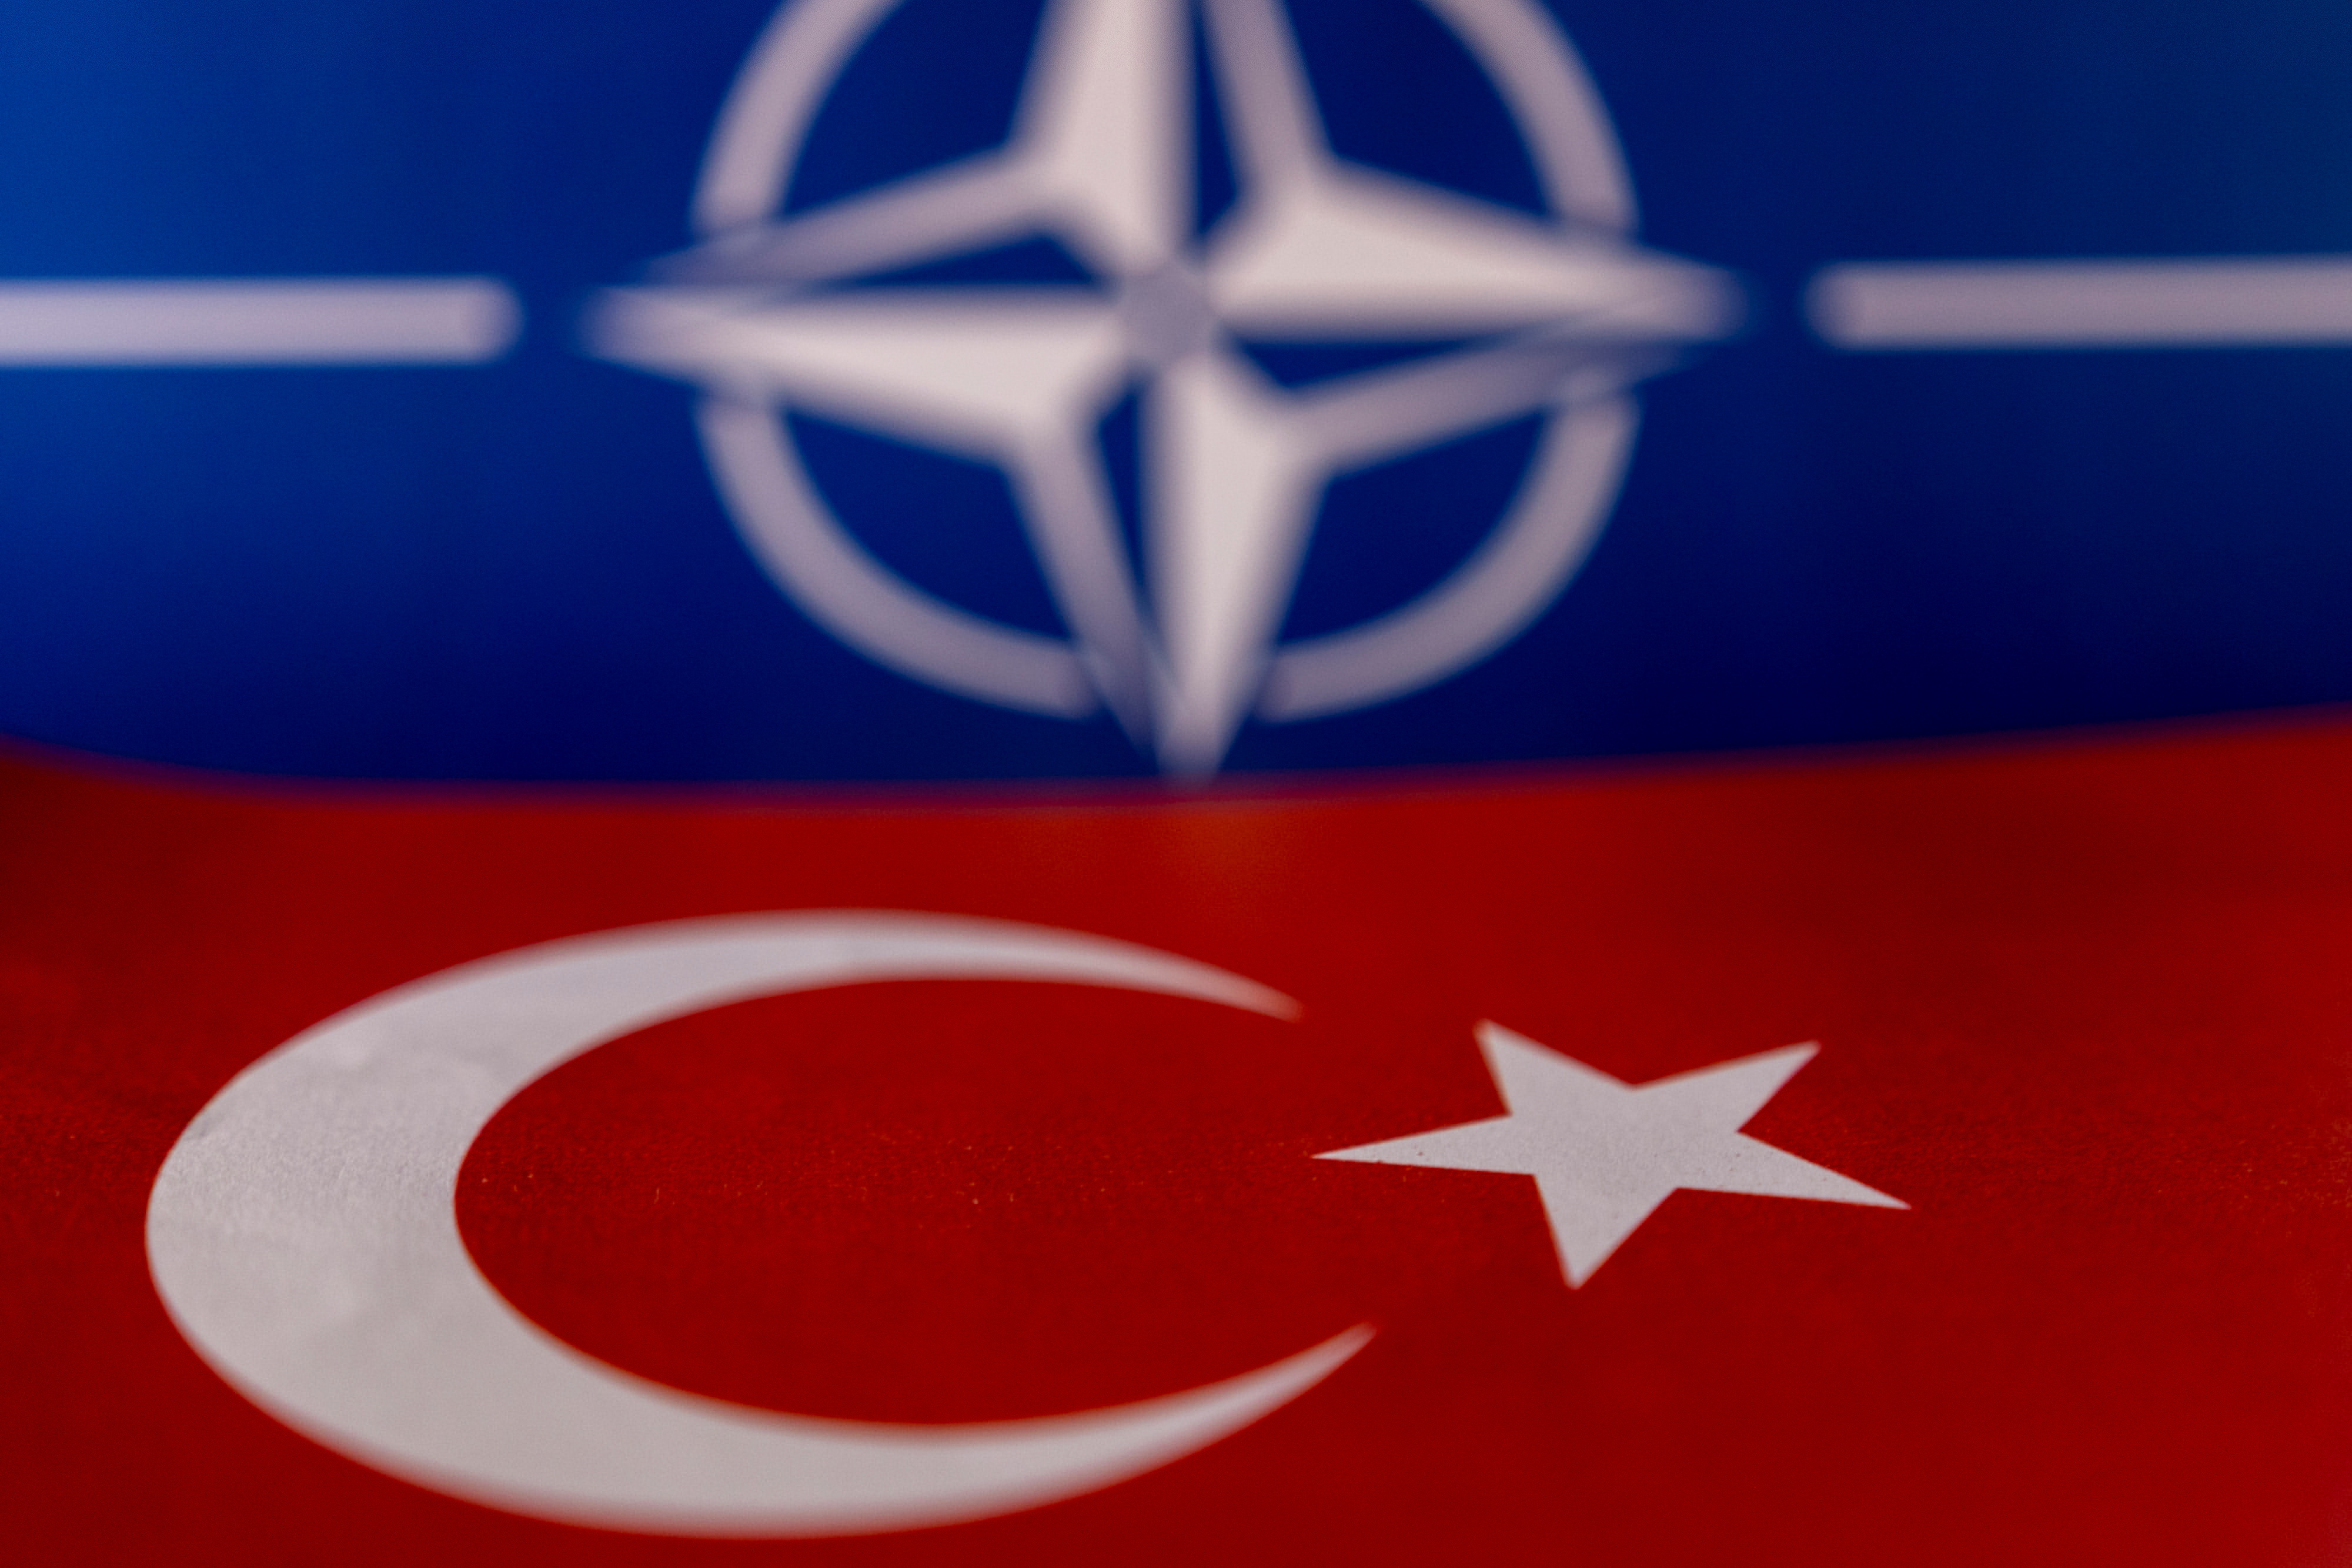 Illustration shows NATO and Turkish flags